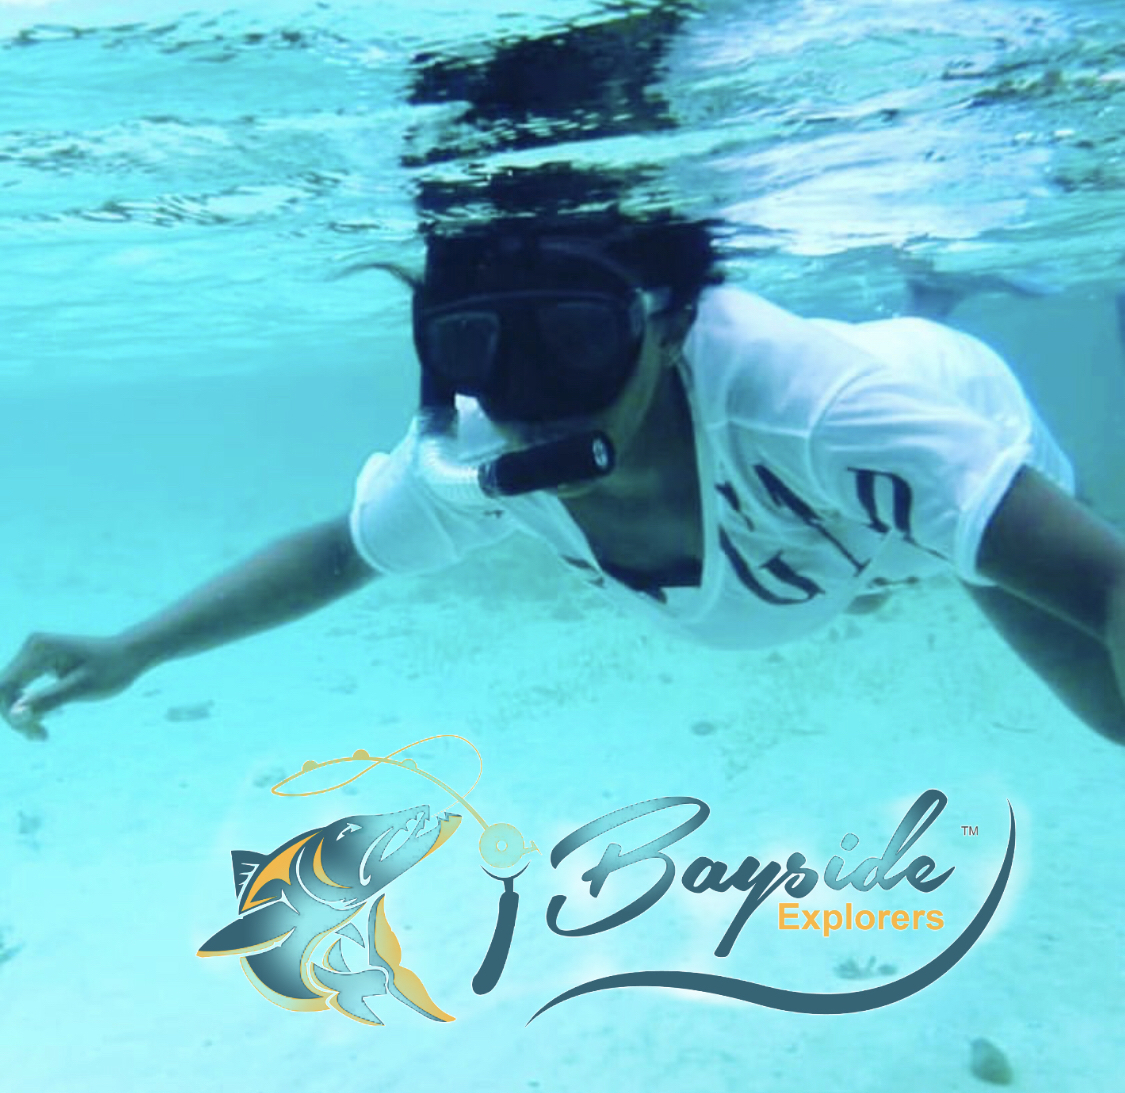 Bayside Explorer's Amongst The Reef - A Snorkeling Excursion - Full Day Tour